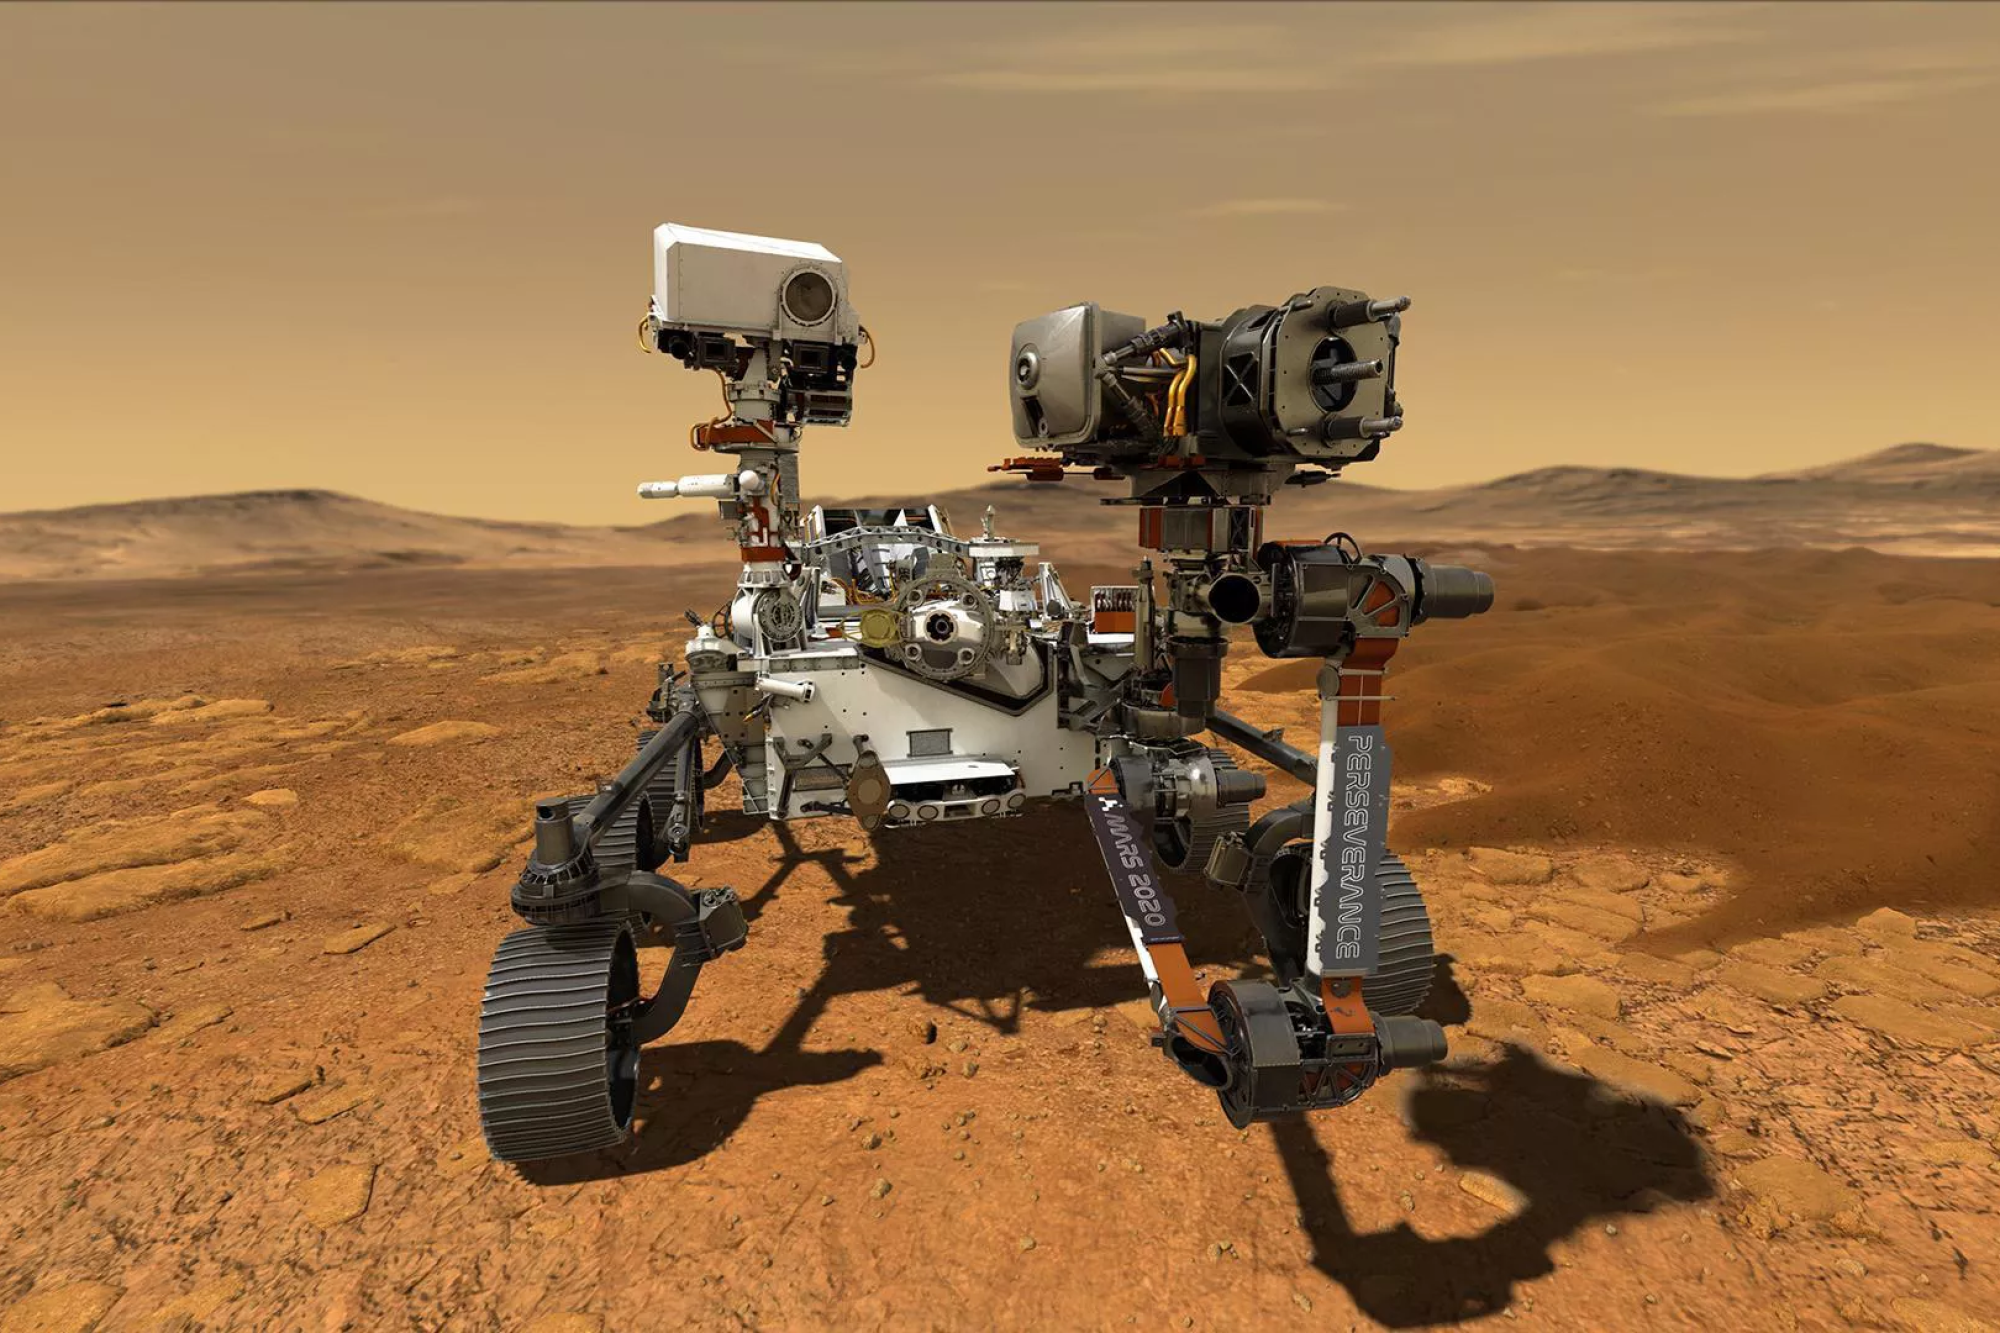 NASA's $3 billion rover Perseverance will carry five cameras from San Diego's Malin Space Science Systems